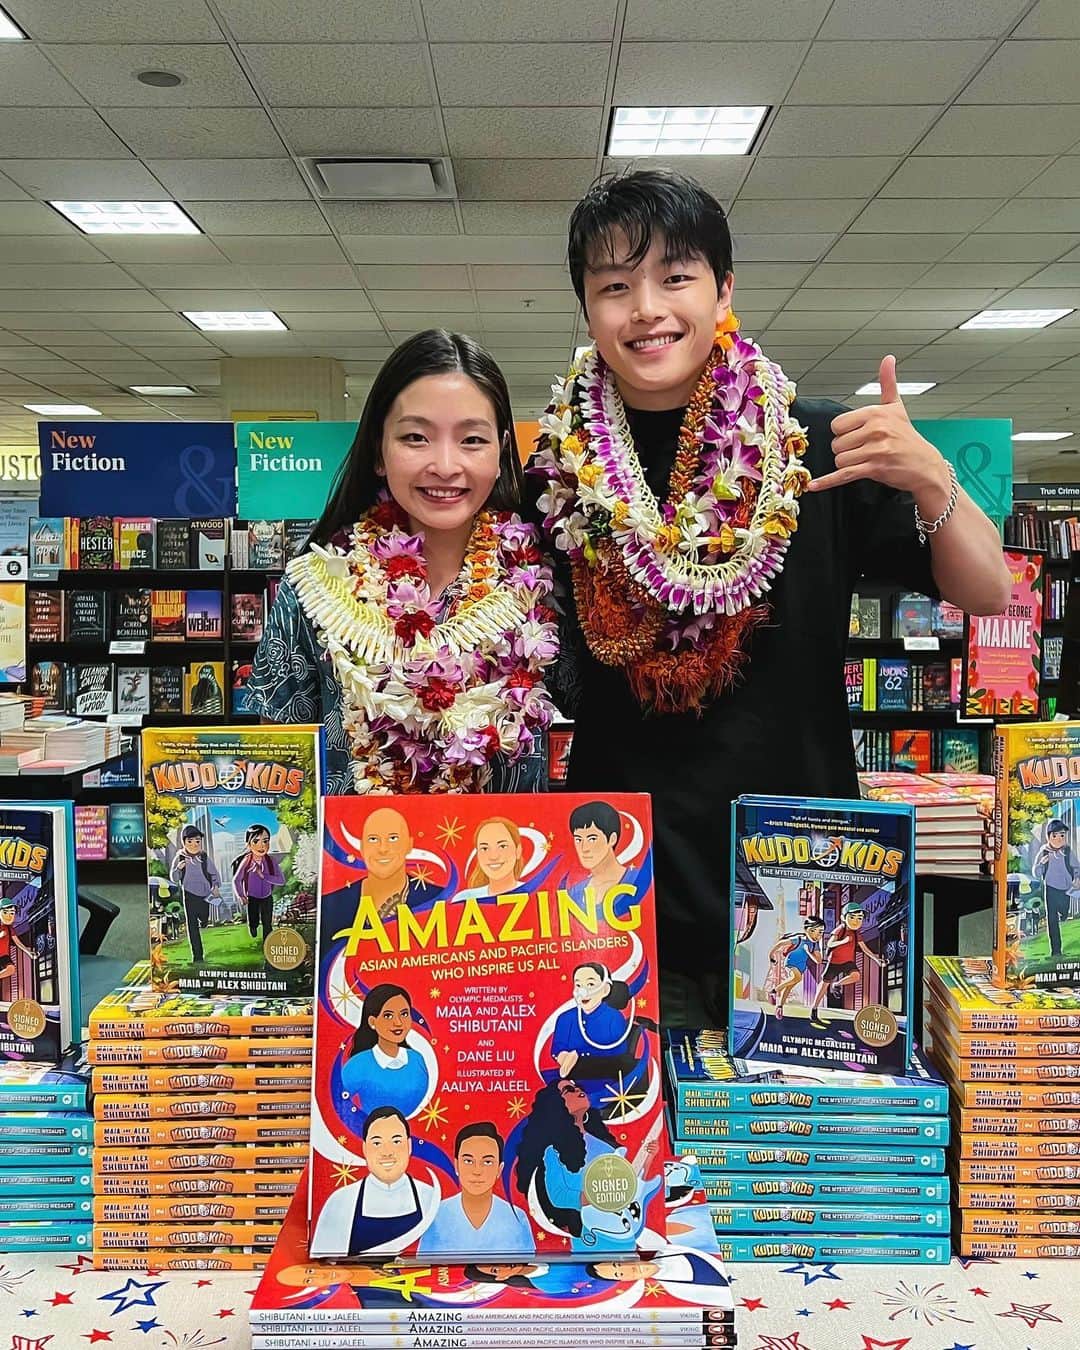 マイア・シブタニさんのインスタグラム写真 - (マイア・シブタニInstagram)「Yesterday’s #AmazingAAPI book tour kick-off event was incredible!   While I knew that it was going to be the first event of our Amazing: Asian Americans and Pacific Islanders Who Inspire Us All book tour, I realized when we arrived at @bnalamoana that it was ALSO our first public book event ever! *Our #KudoKids books came out during the height of the pandemic in 2020 and 2021 when in-person events were not possible.  The event started at 2pm and we didn’t end up leaving the store until after 7pm. To all of our friends and supporters, THANK YOU for taking the time to come out and see us. Standing in line were individuals, families, groups of friends, teachers (so many!), skaters (shoutout to the wonderful community at @icepalacehawaii), and fans who have been cheering us on since 2009! Many of you waited in line for over 3 hours!! We are so humbled and honored that the Honolulu community came out to support us and this book—special shoutout to @usjapancouncil, @jcchawaii, and @pigandthelady for spreading the word about our visit to the island.  Thank you for ALL of the beautiful leis, snacks, food recs, cards, and gifts. We enjoyed meeting and talking to each and every one of you. I especially appreciated the kind words about our books, skating, and thoughtful check-ins on my health. 🧡  Alex and I are really passionate and intentional about everything we do and believe in the power and possibilities of this new book, AMAZING. Our hope is that it can be a game changer for AAPI representation in kid’s literature, as well as advance the ongoing effort for AAPI history inclusion in K-12 curriculum across the United States.   To Haunani, Ross, and rest of the wonderful B&N staff, thank you for hosting us. The beautiful window display at @alamoanacenter was our FIRST and we will never forget it! 🤙  To Jenny, Dane, Aaliya, Opal, and the rest of the team at Viking + @penguinkids, thank you for your hard work and belief in this book. 🙏  To top it all off, part-way through our signing I got a very a special Twitter notification. More on that in my next post! 😉  The link to preorder AMAZING is in my bio! 🫶✨」4月10日 10時47分 - maiashibutani